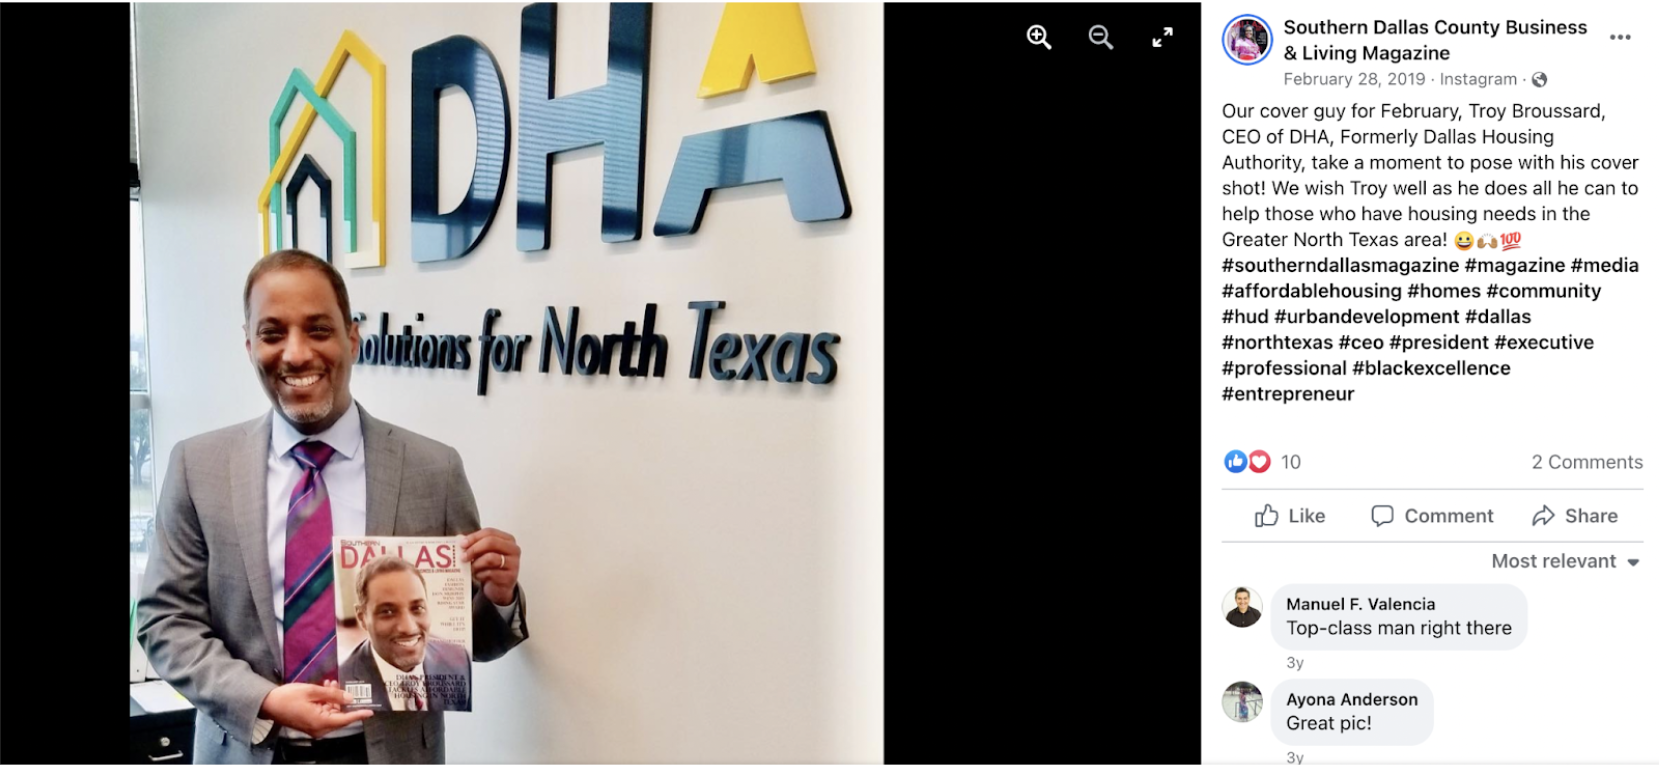 DHA official pictured next to the company logo